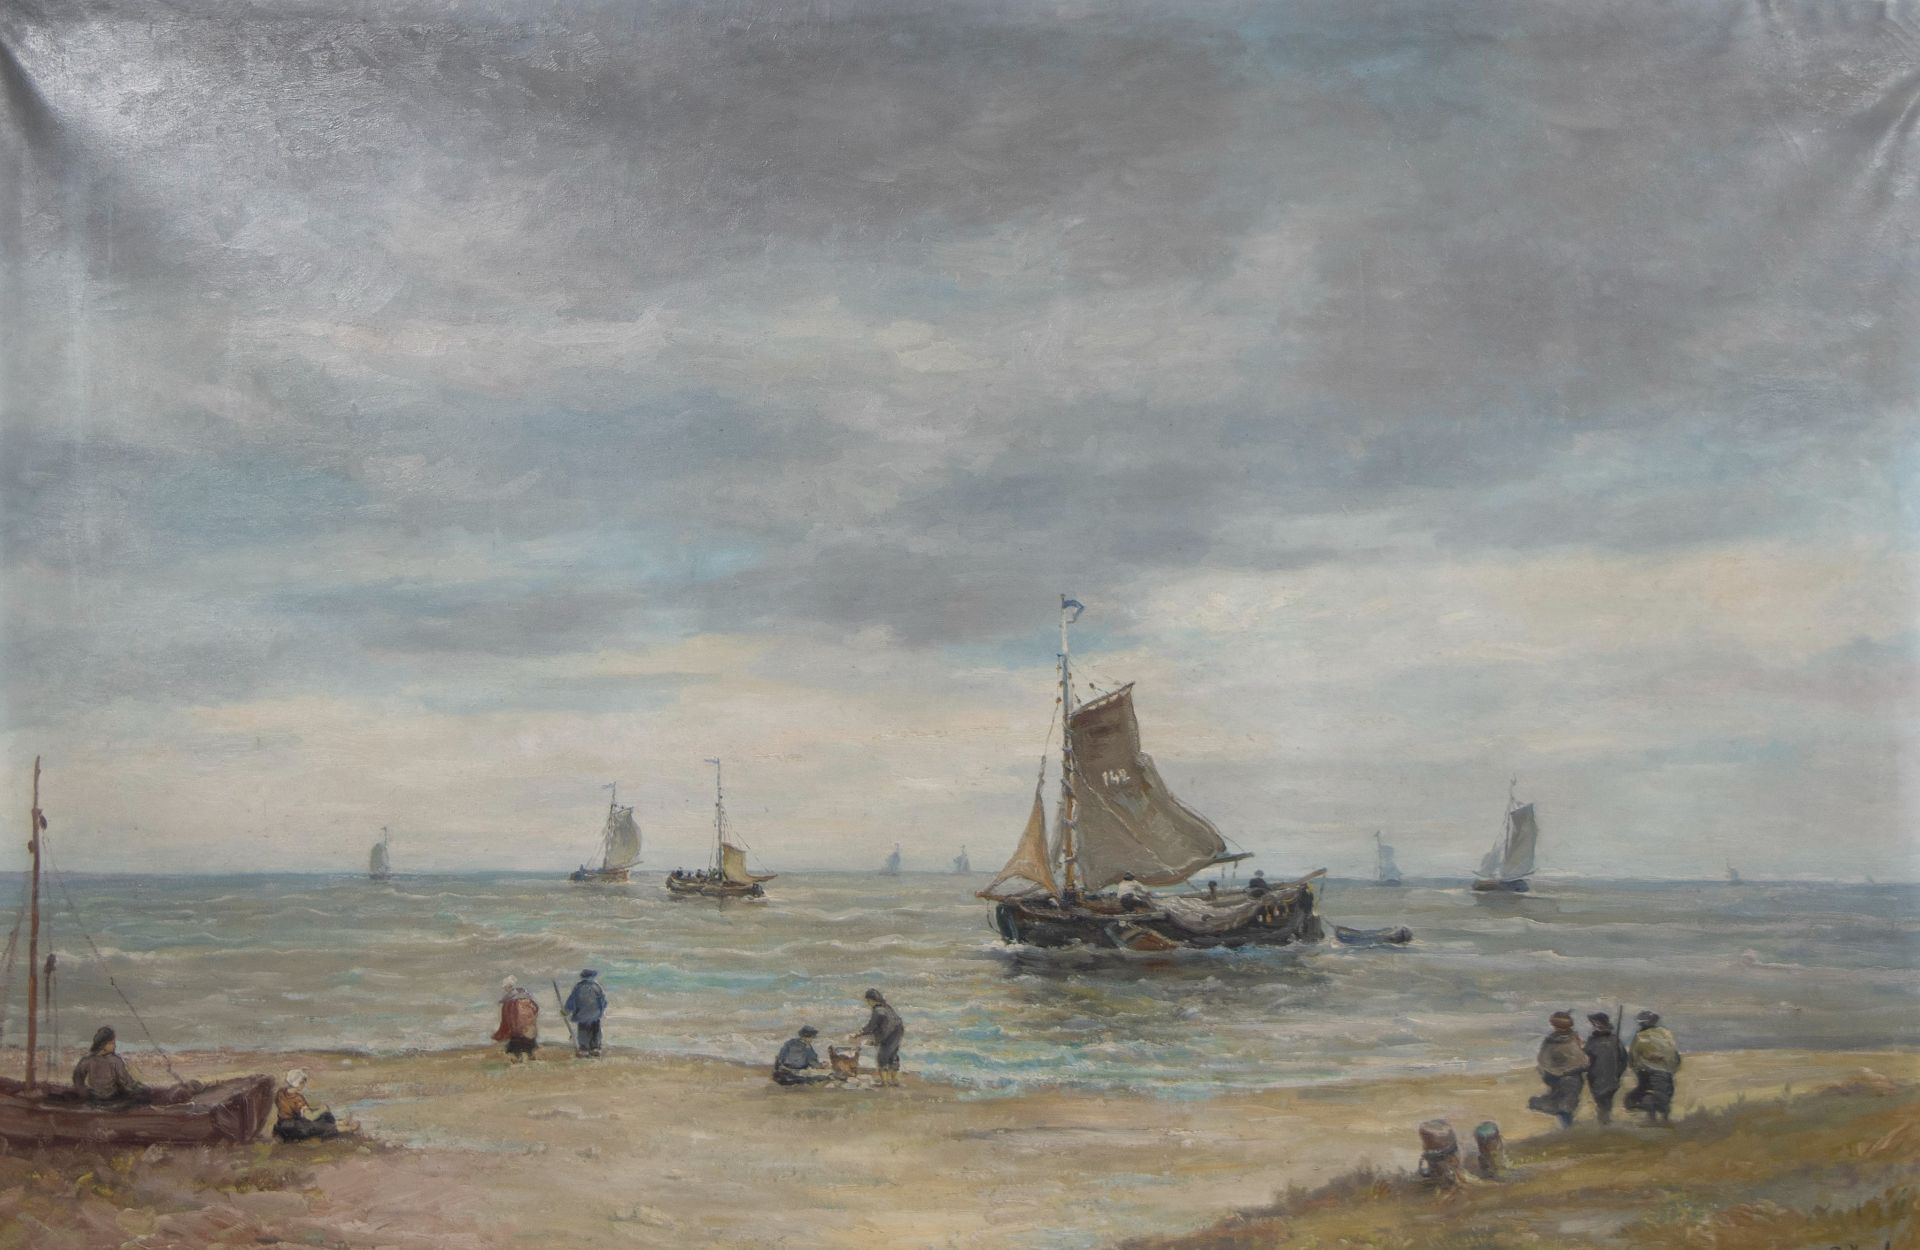 Europese school, Oil on canvas Marine, signed l. Jacobs